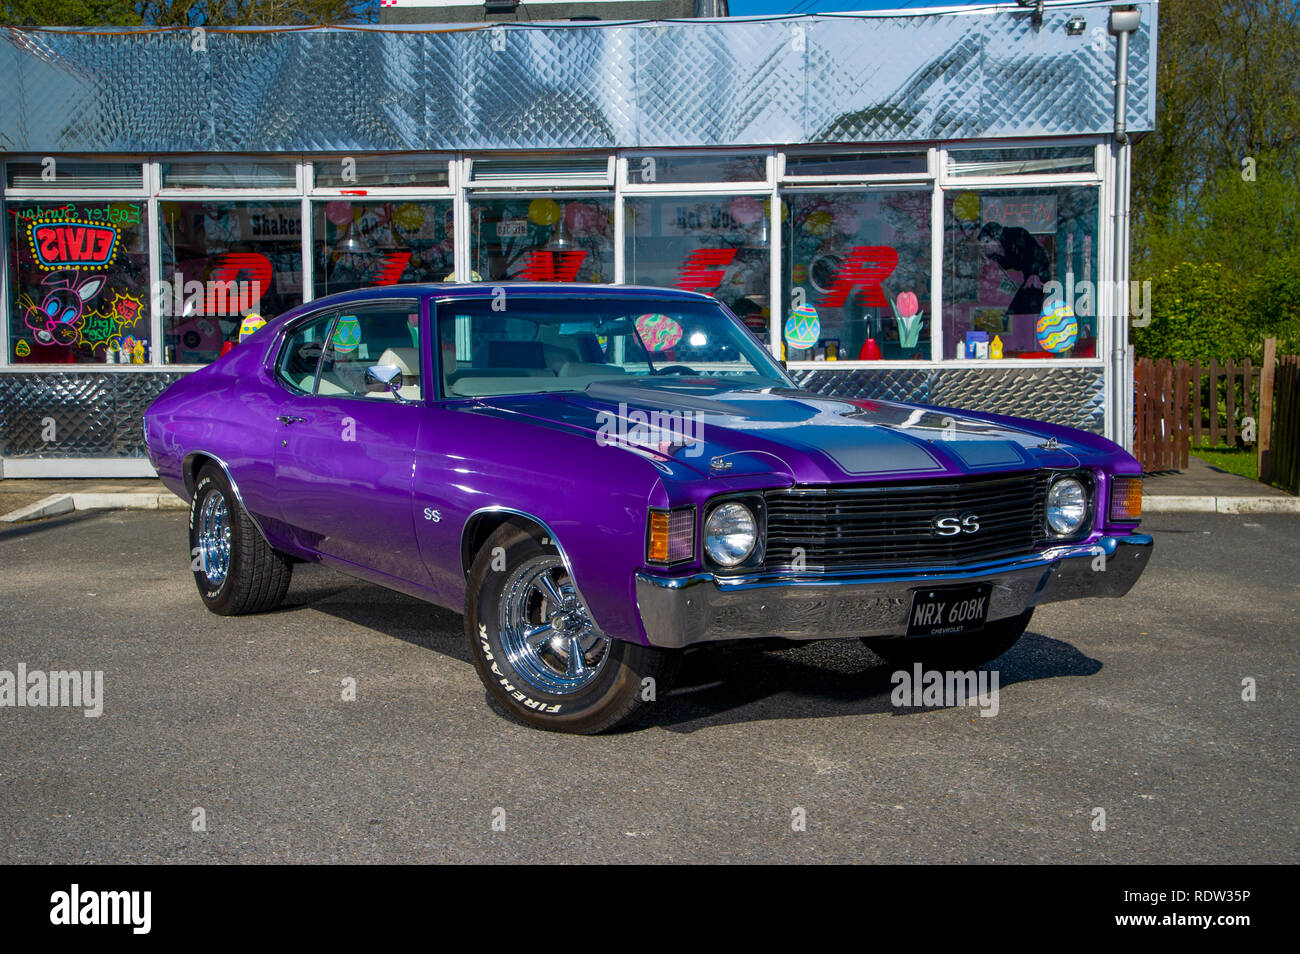 1972 Chevrolet Chevelle SS Classic American Muscle Car Stockfotografie -  Alamy